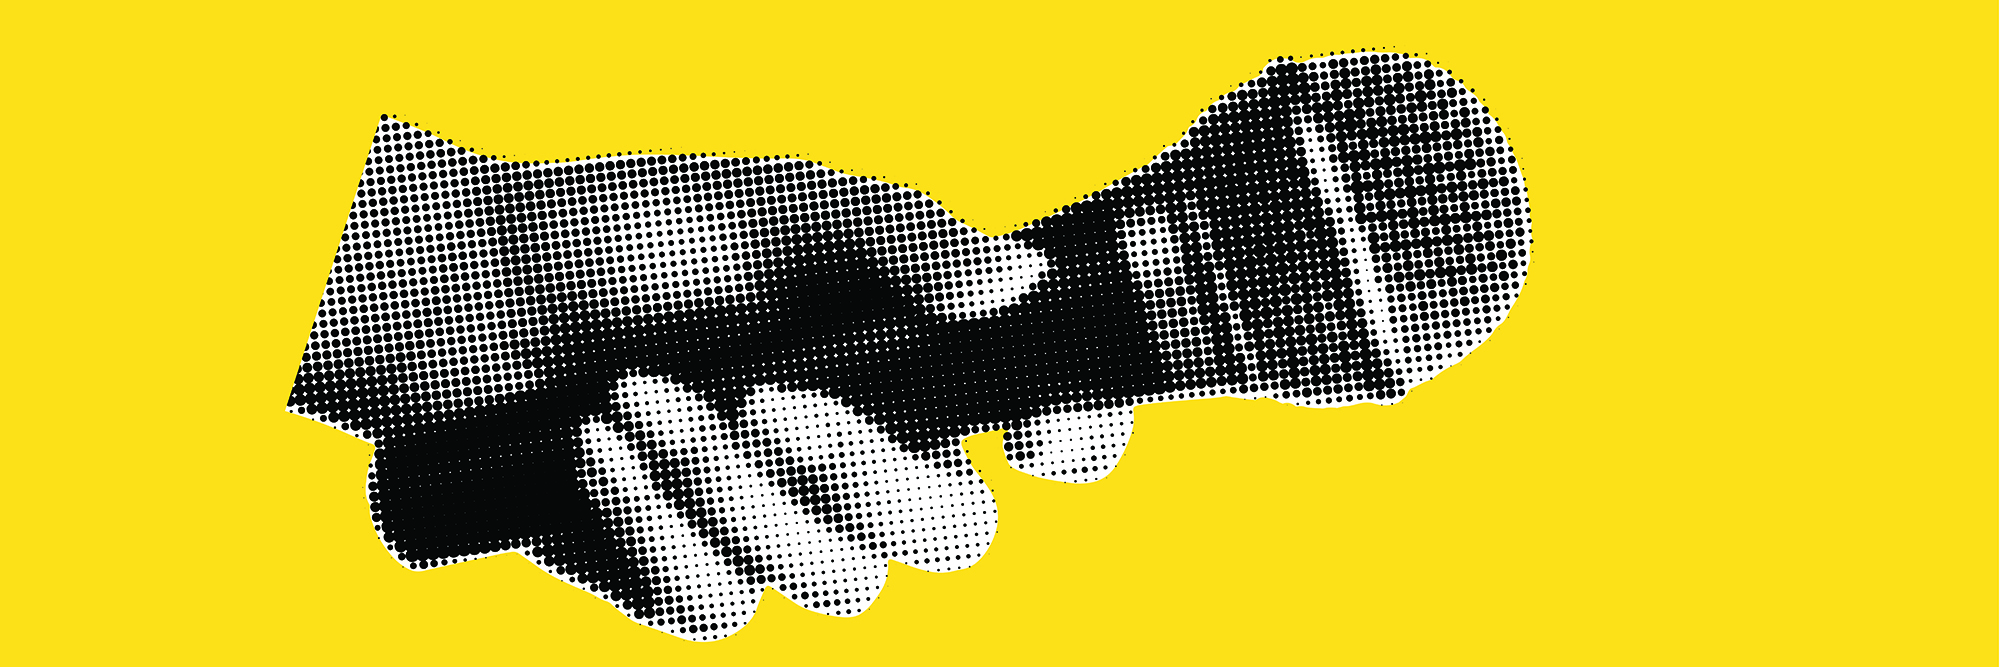 A hand holds a microphone. Collage element in halftone effect. P